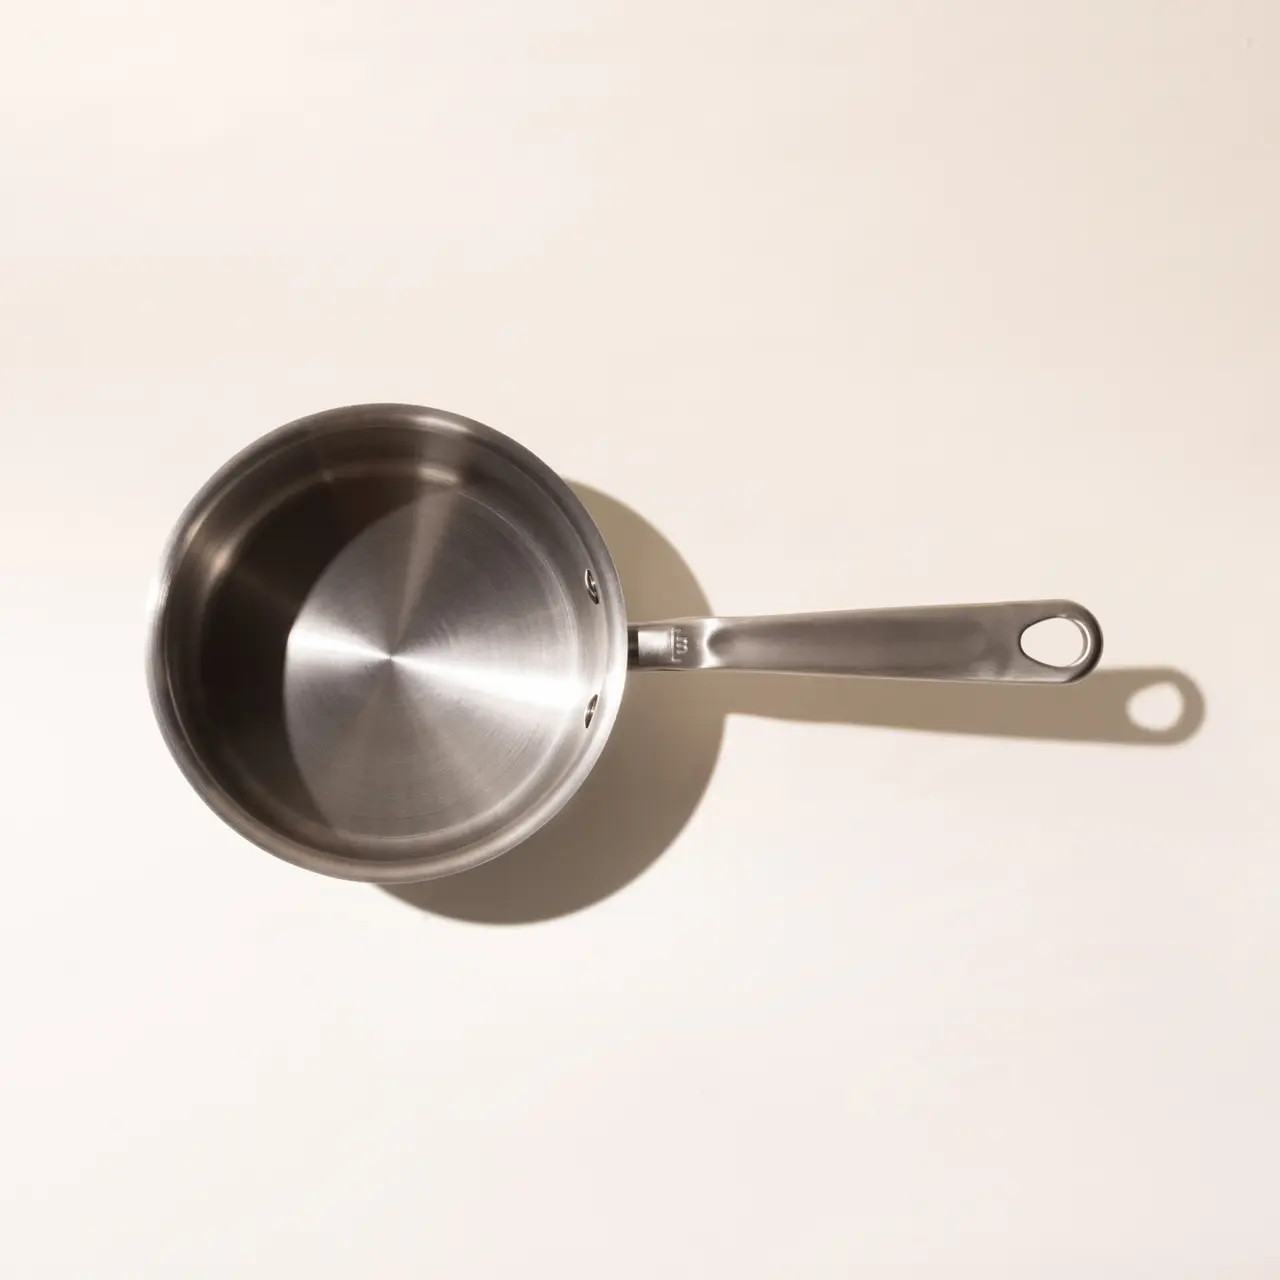 Stainless Clad Saucepan